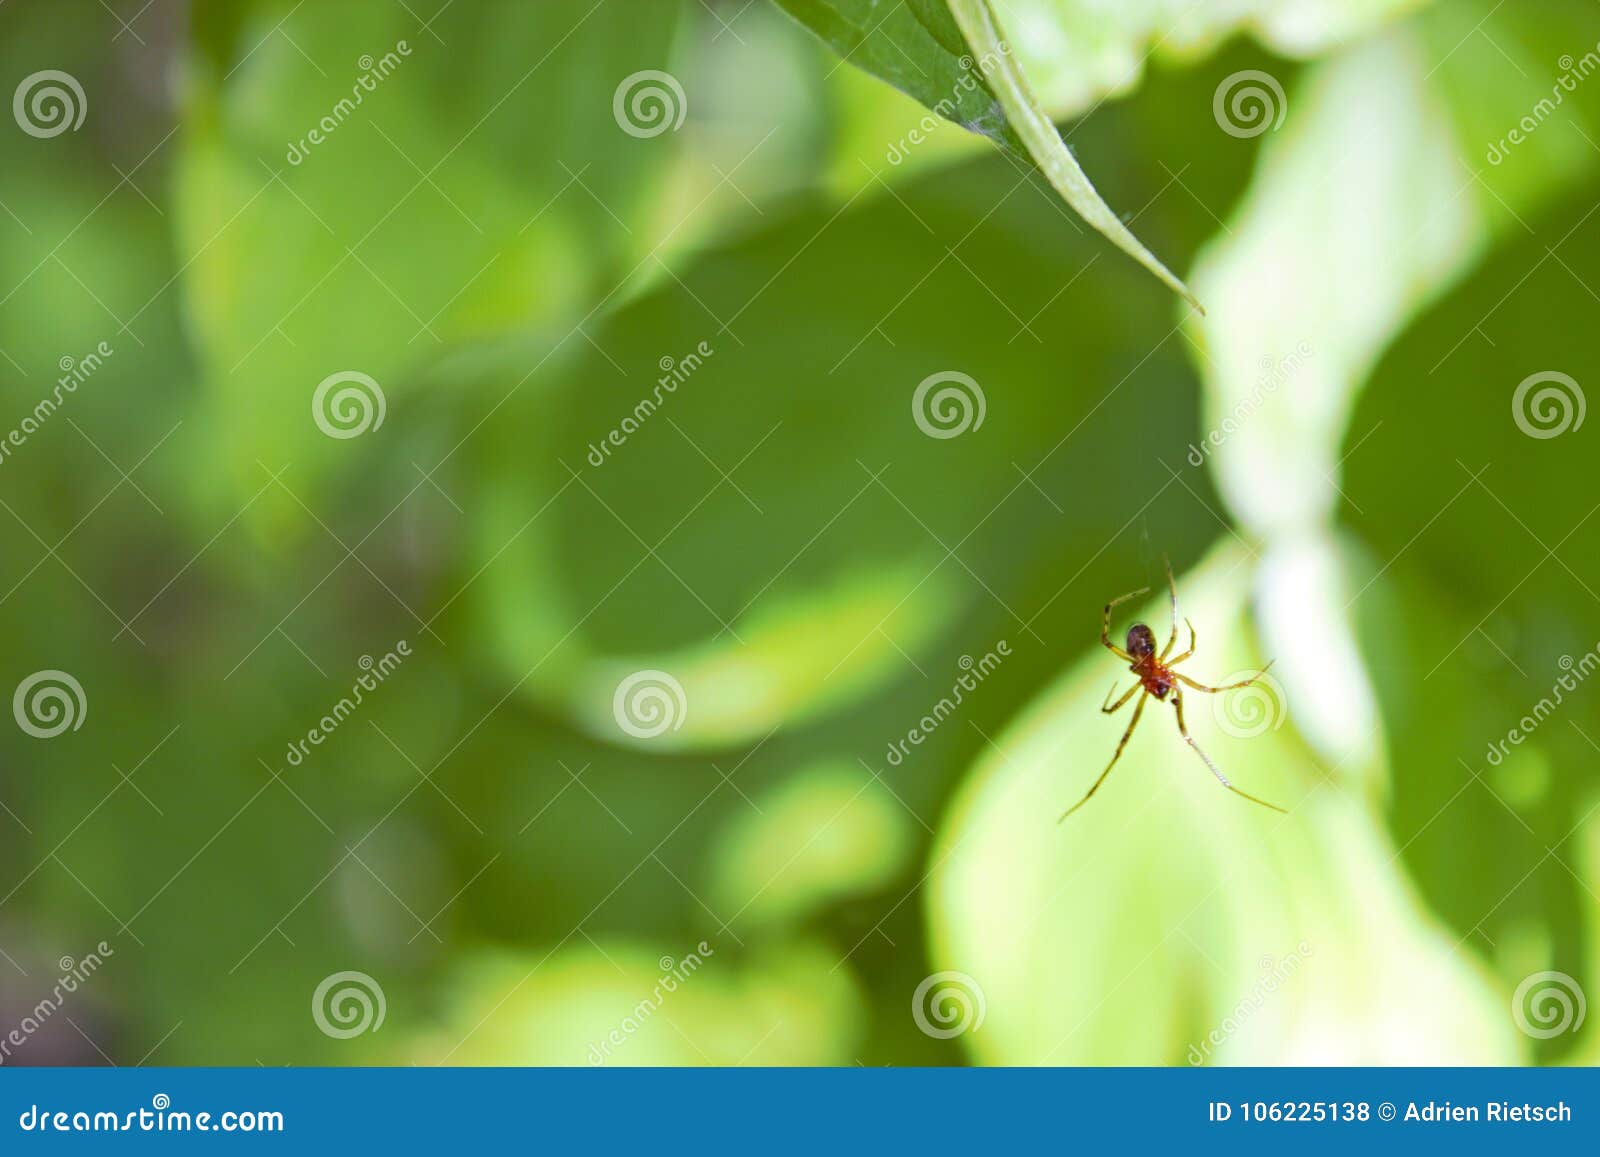 spider hanging from a web wallpaper